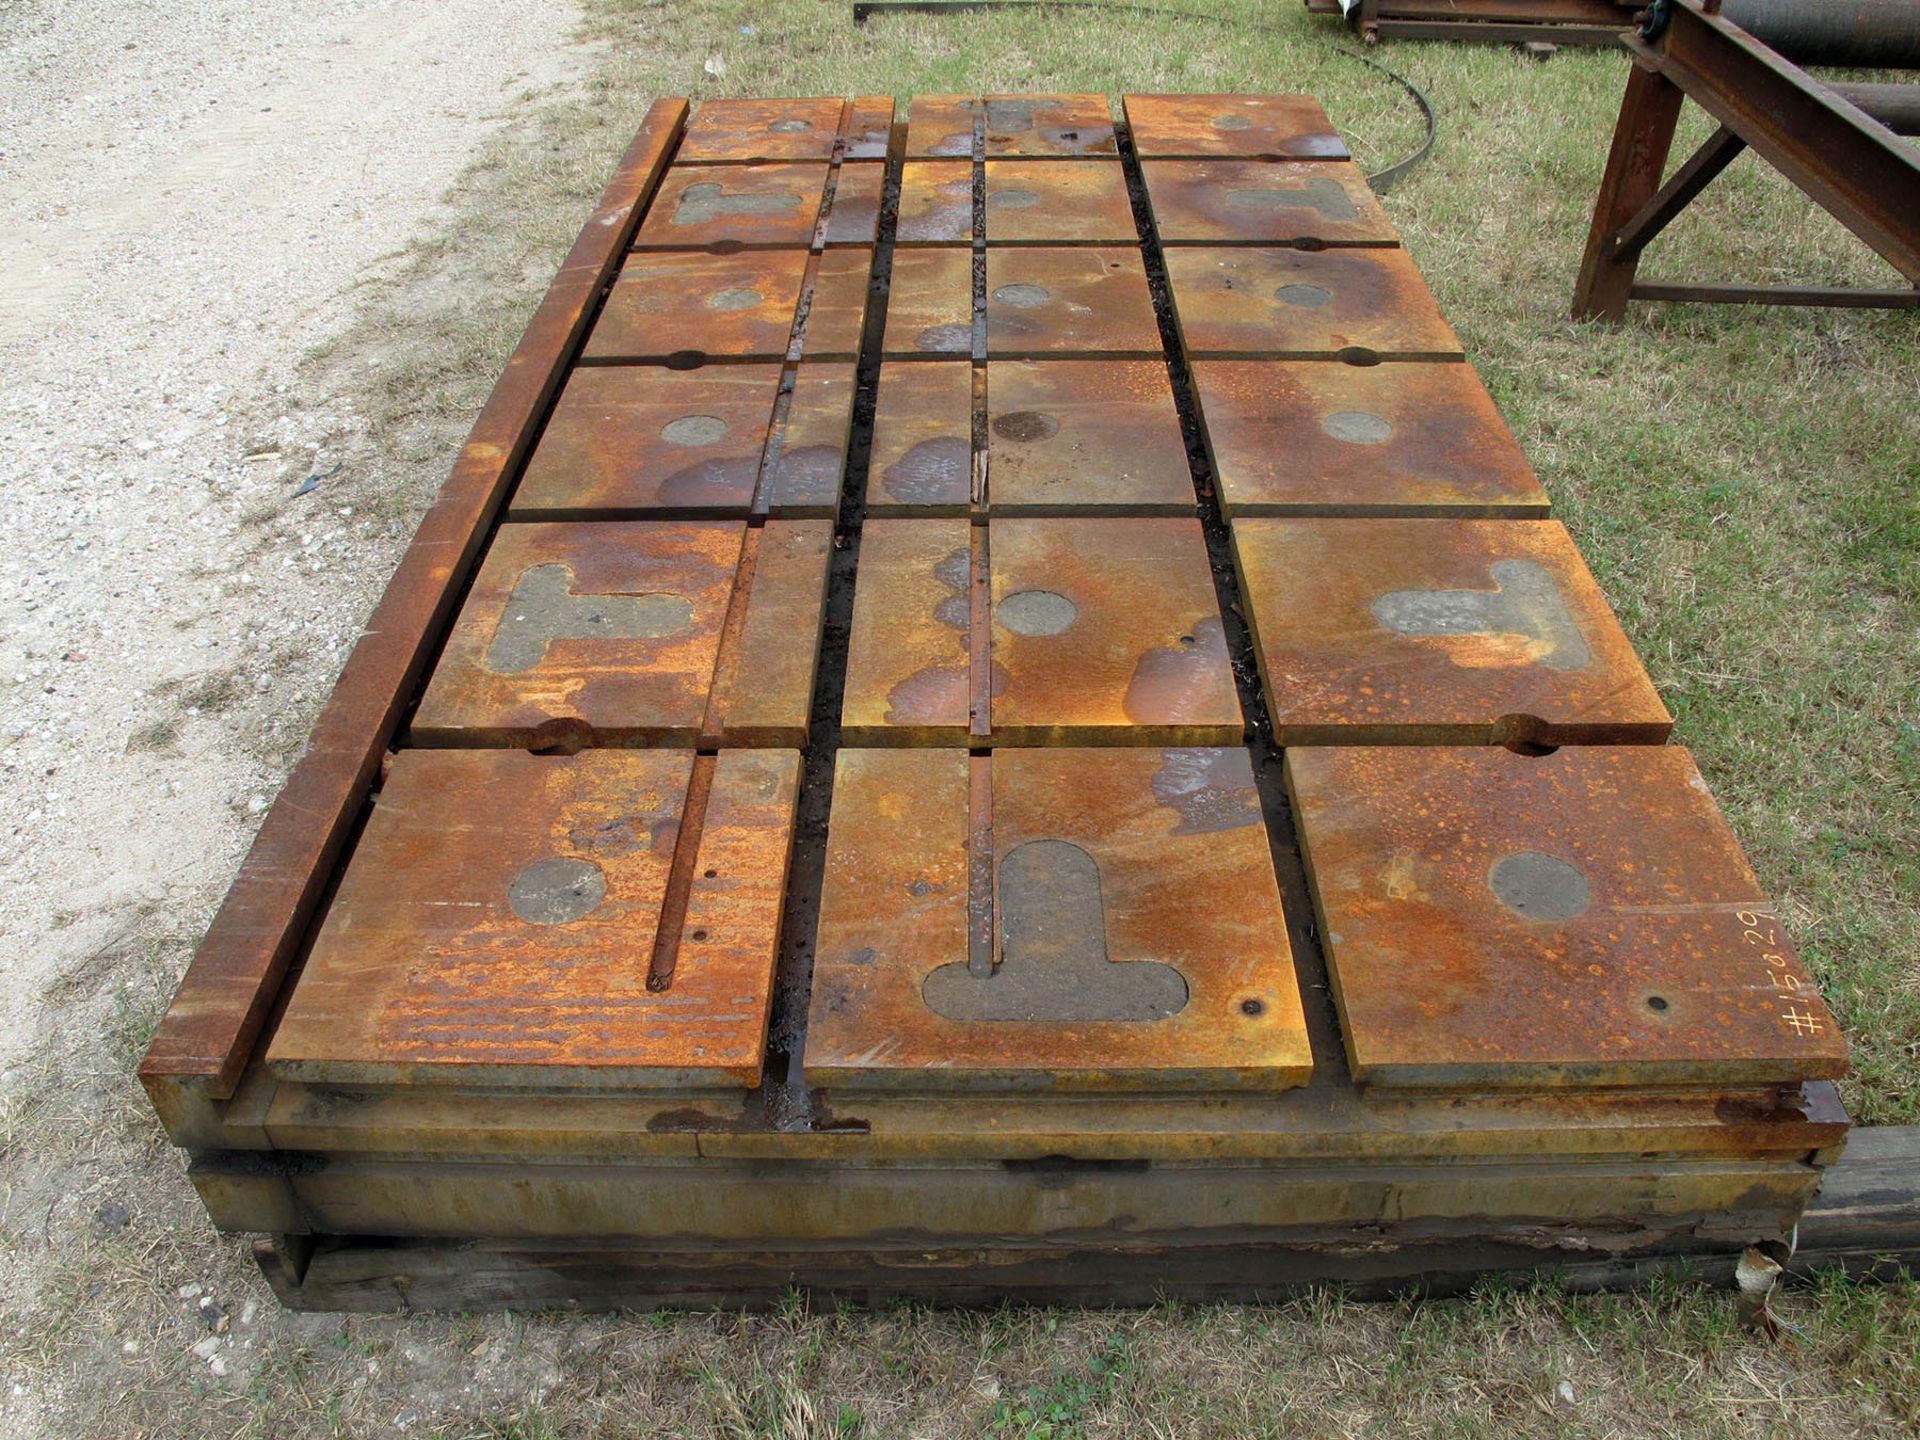 10' X 6â€™ T-SLOTTED FLOOR TABLE WITH EXTRA T-SLOT, 120" x 53-1/2" x 10" ht., (2) long. T-slots on